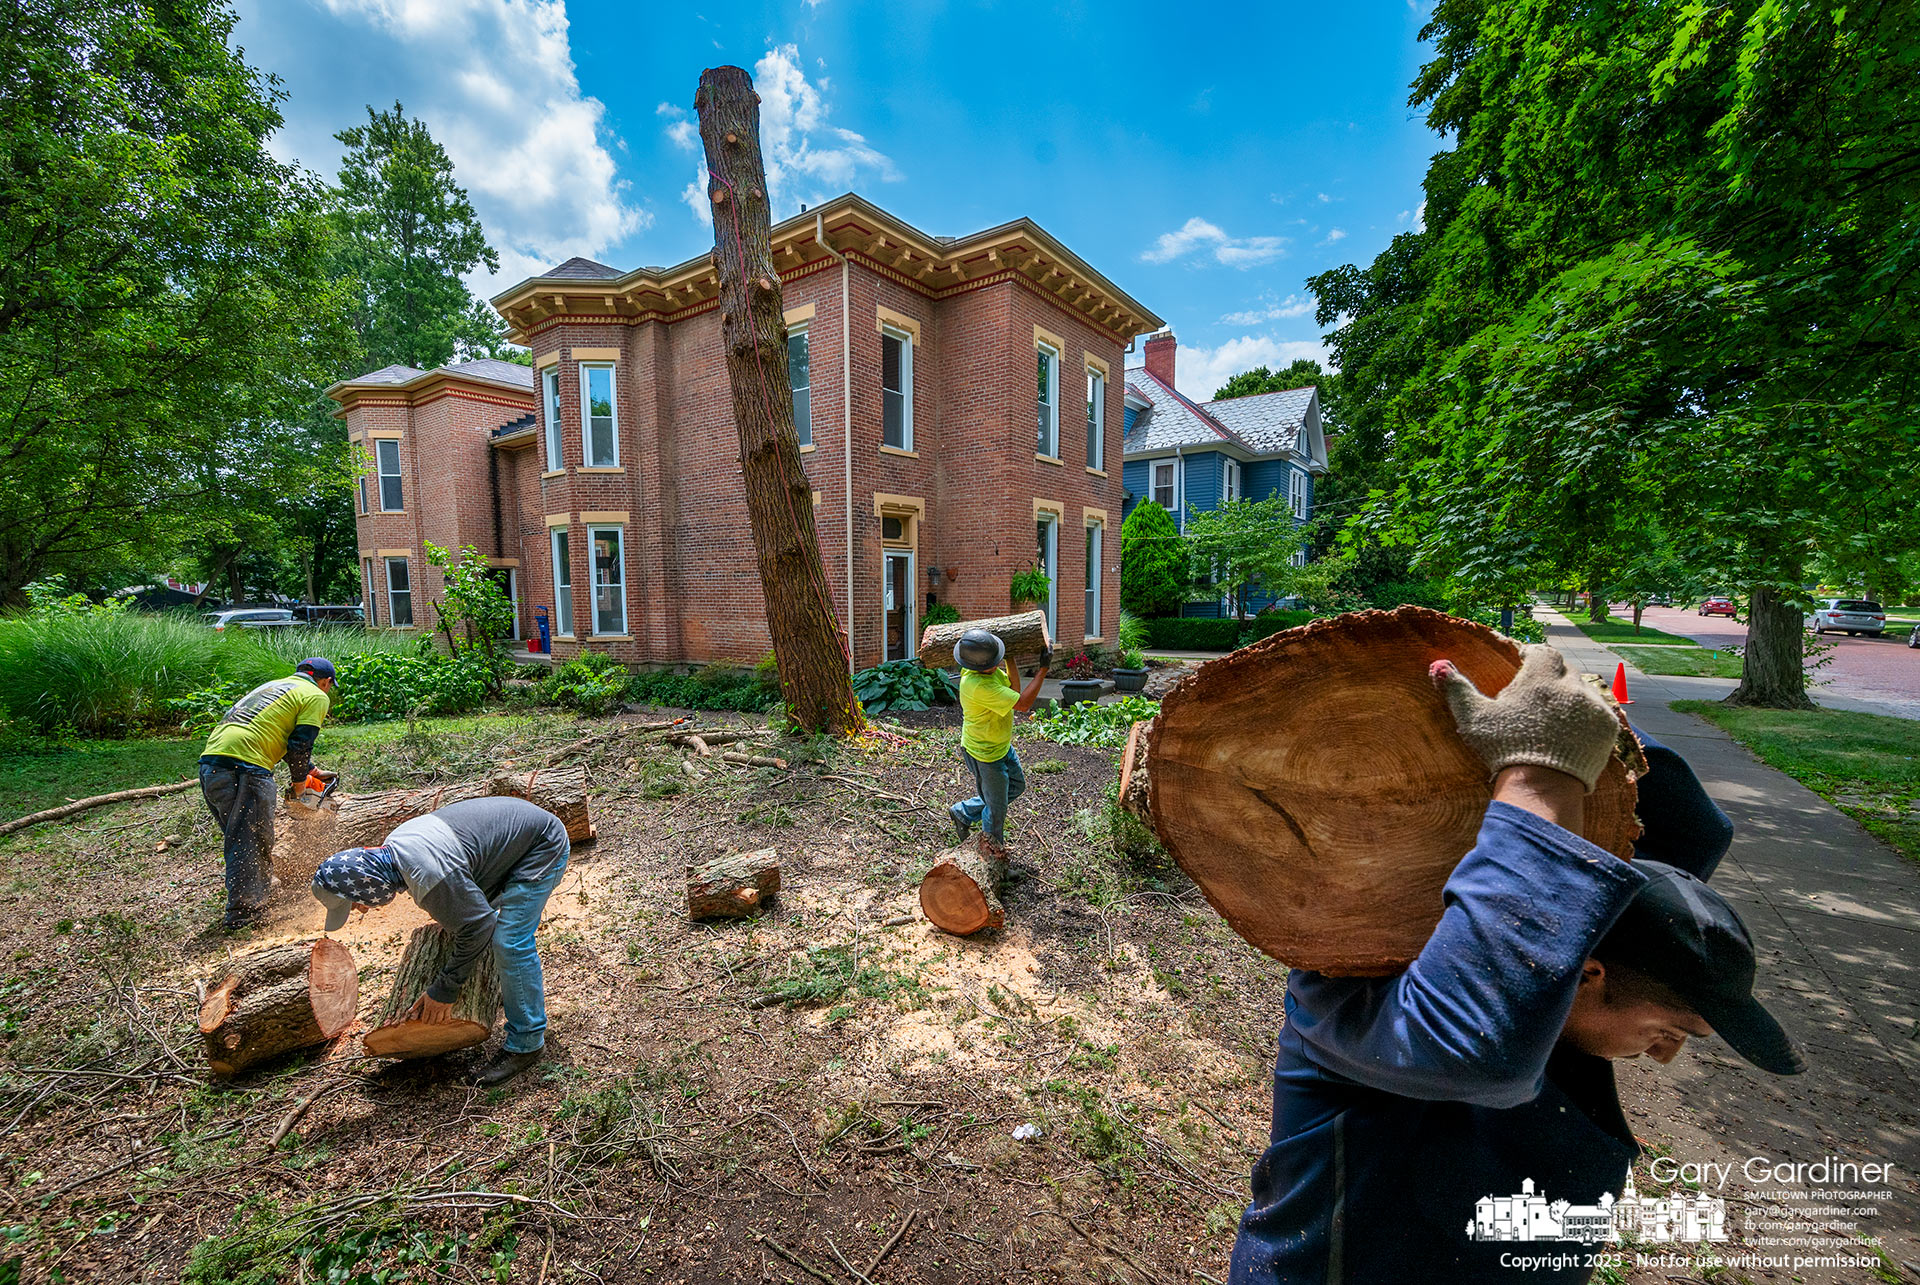 A tree removal crew clears sections of the upper trunk of a pine tree before felling the lower section in the front yard of a house on West College. My Final Photo for July 20, 2023.